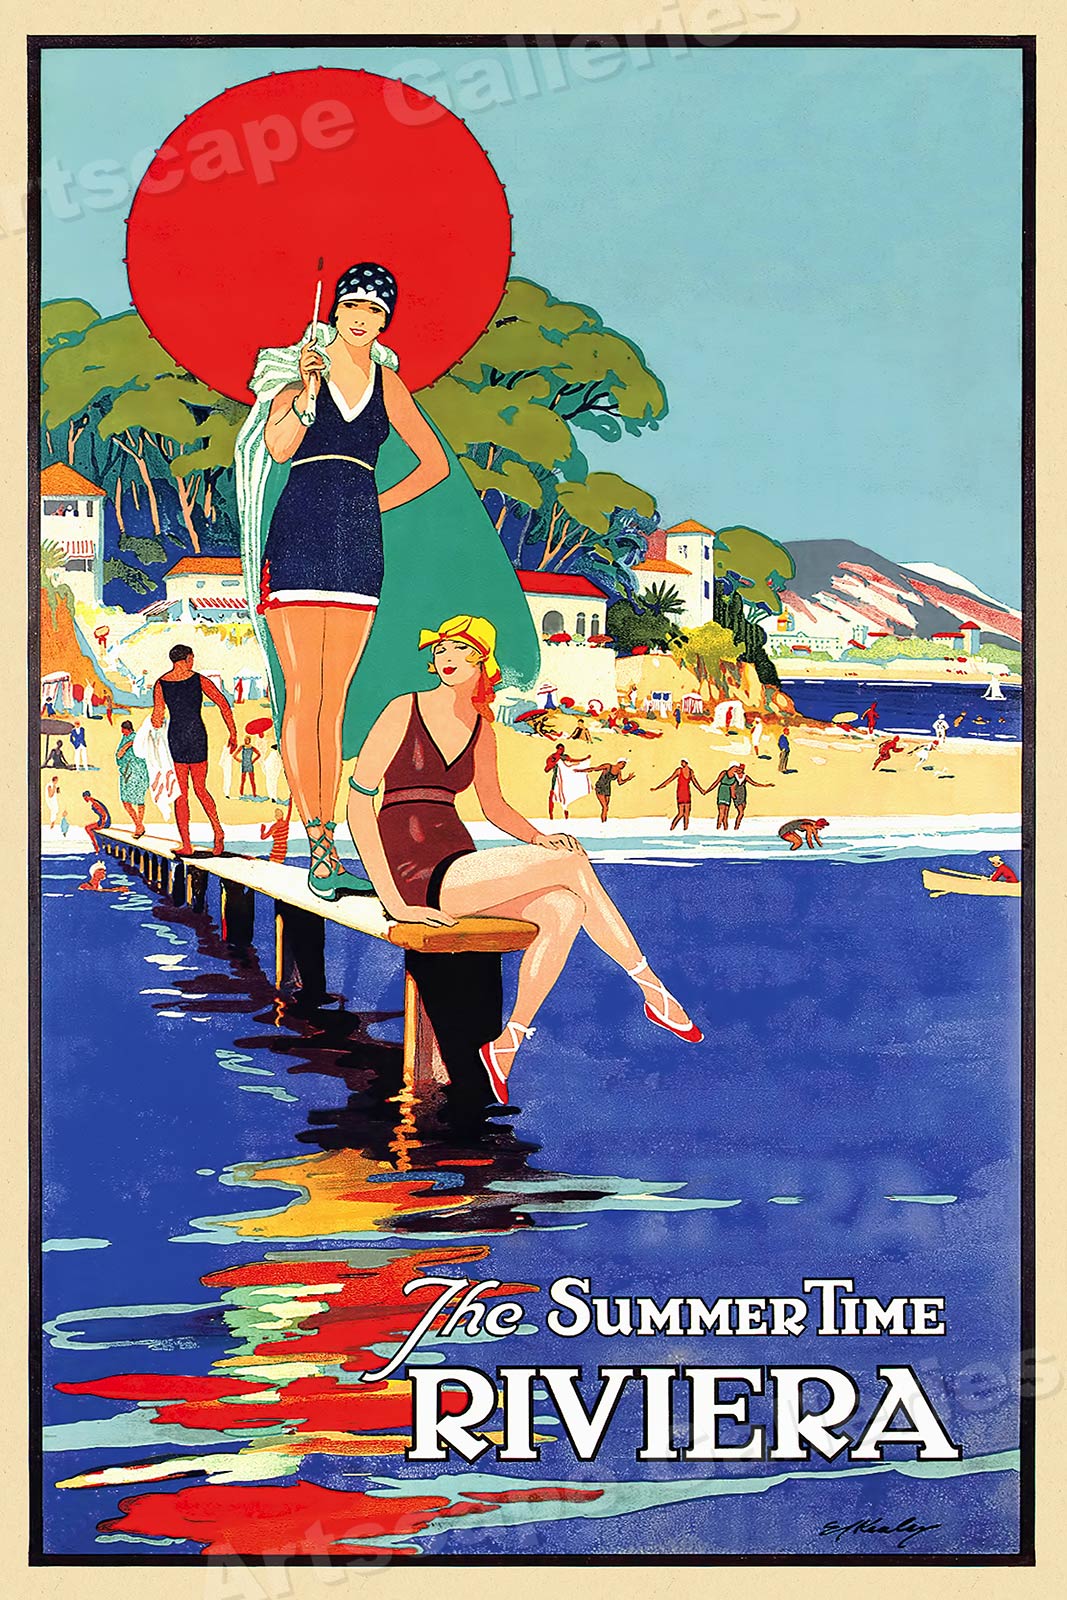 travel poster vintage style